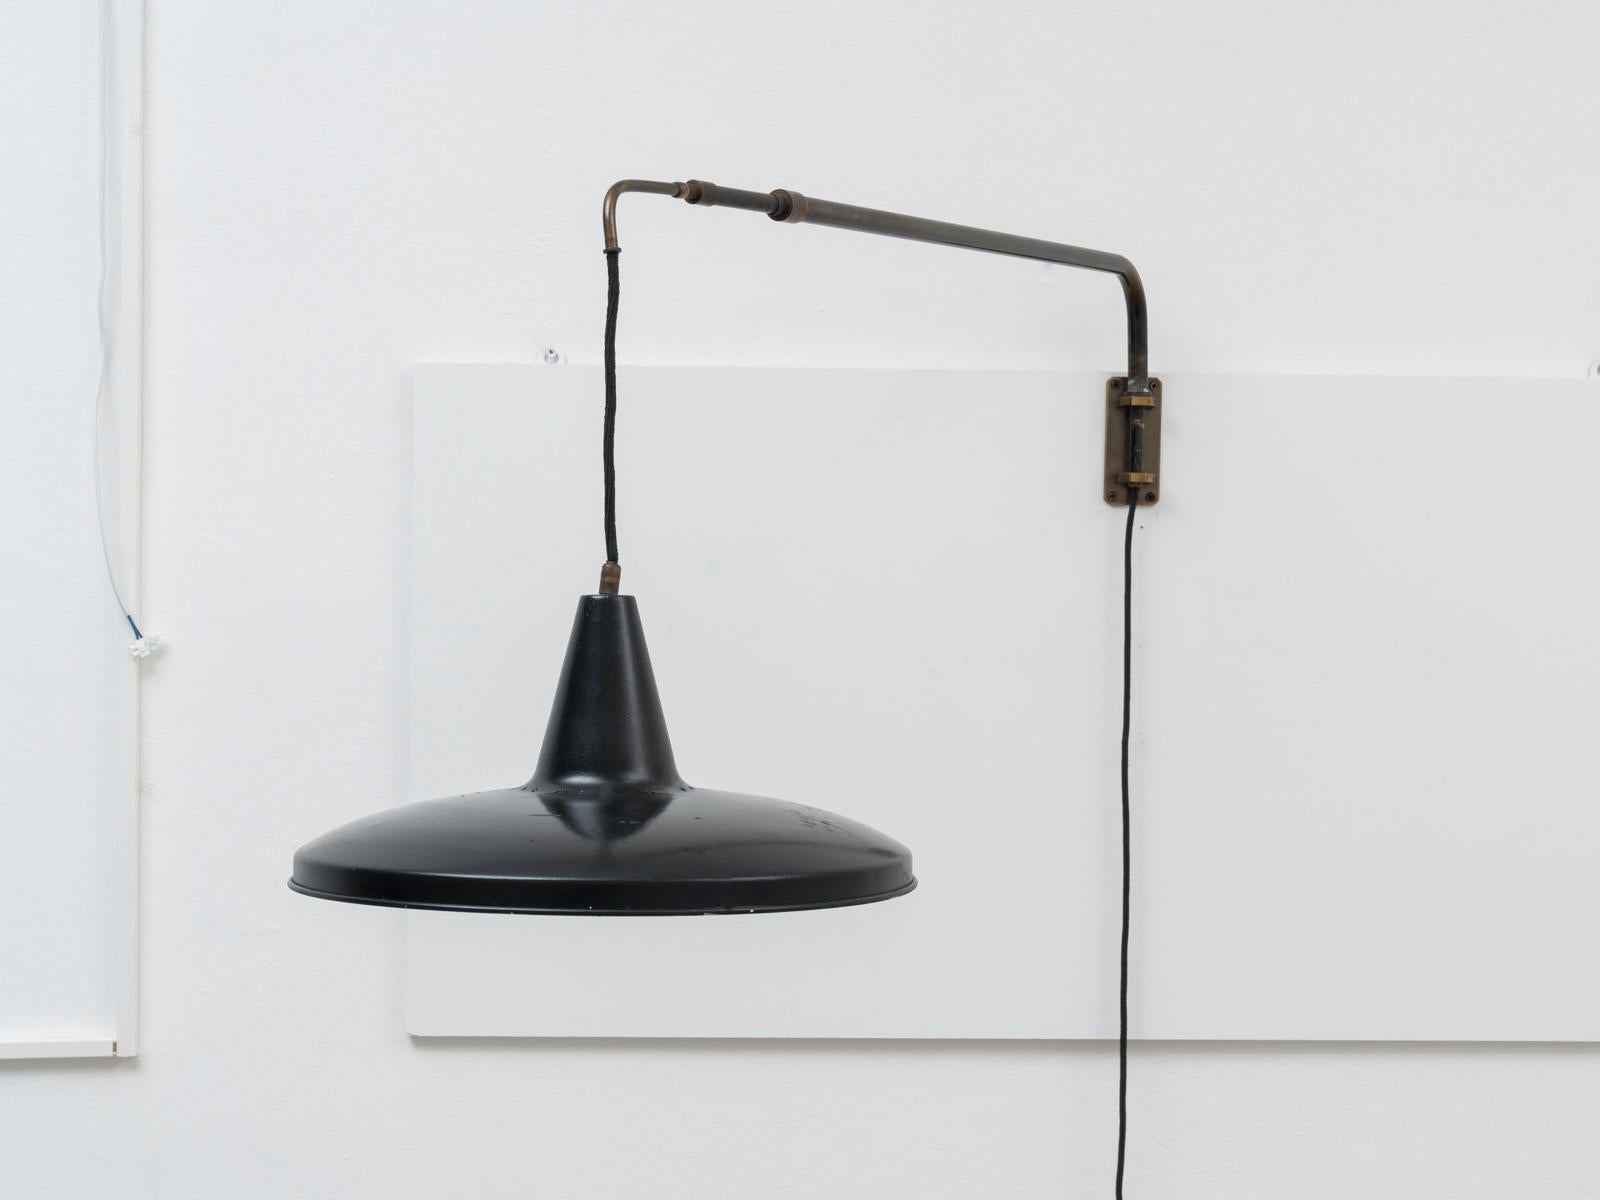 Italian Mid-Century Modern brass black Swiveling telescopic wall lamp, 1950s this counterweight wall lamp was designed in Italy in the 1950s. The designer is still unidentified, but the lamp is inspired to similar models by Arredoluce and Arteluce.